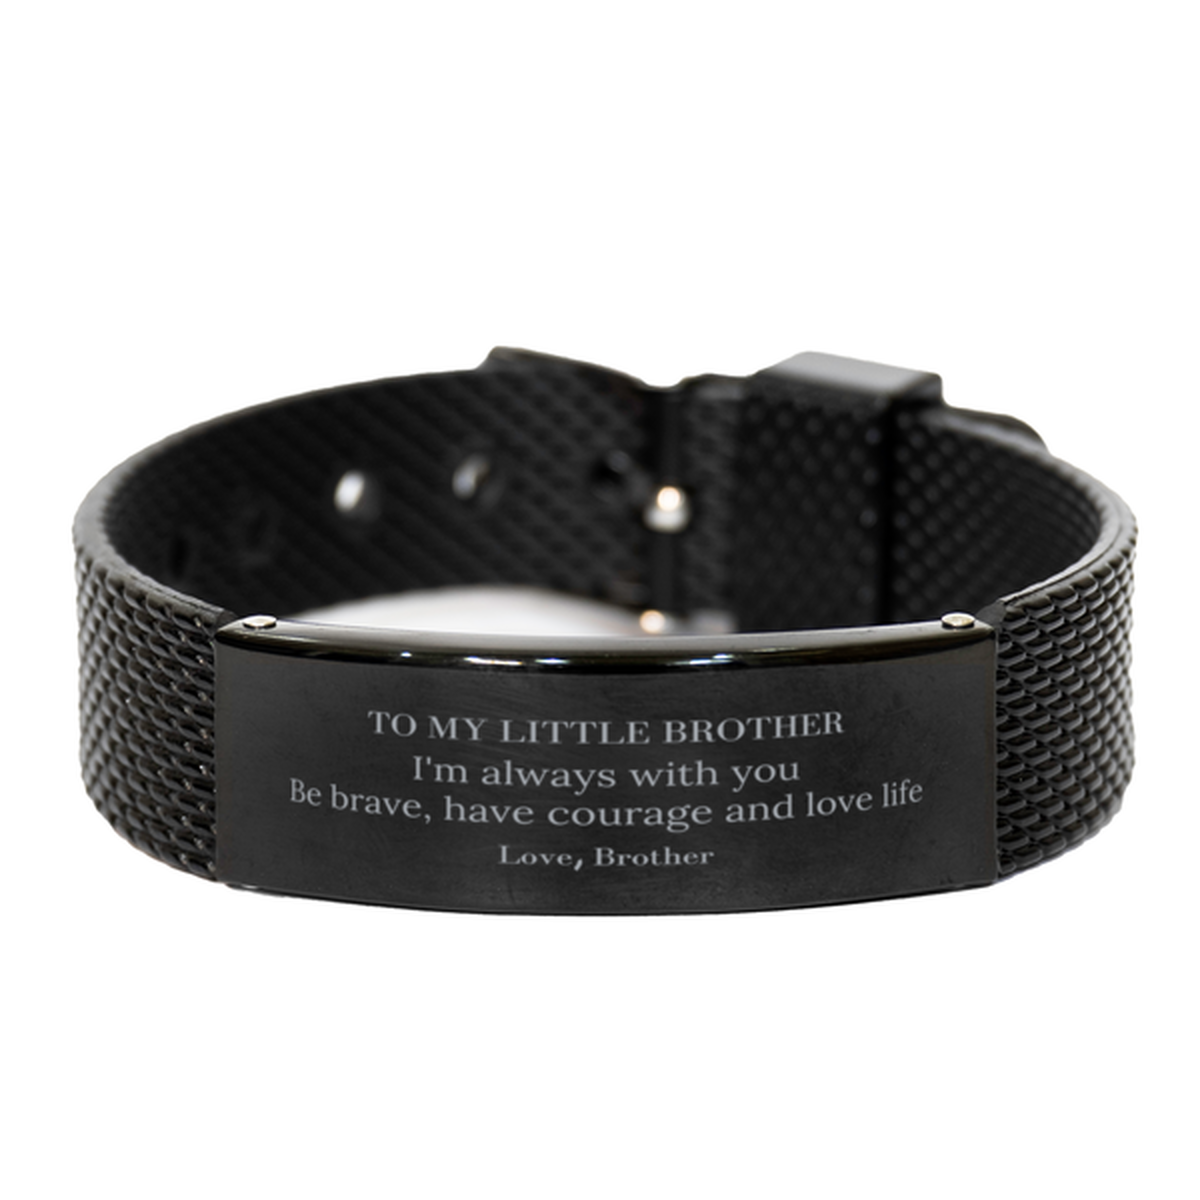 To My Little Brother Gifts from Brother, Unique Black Shark Mesh Bracelet Inspirational Christmas Birthday Graduation Gifts for Little Brother I'm always with you. Be brave, have courage and love life. Love, Brother